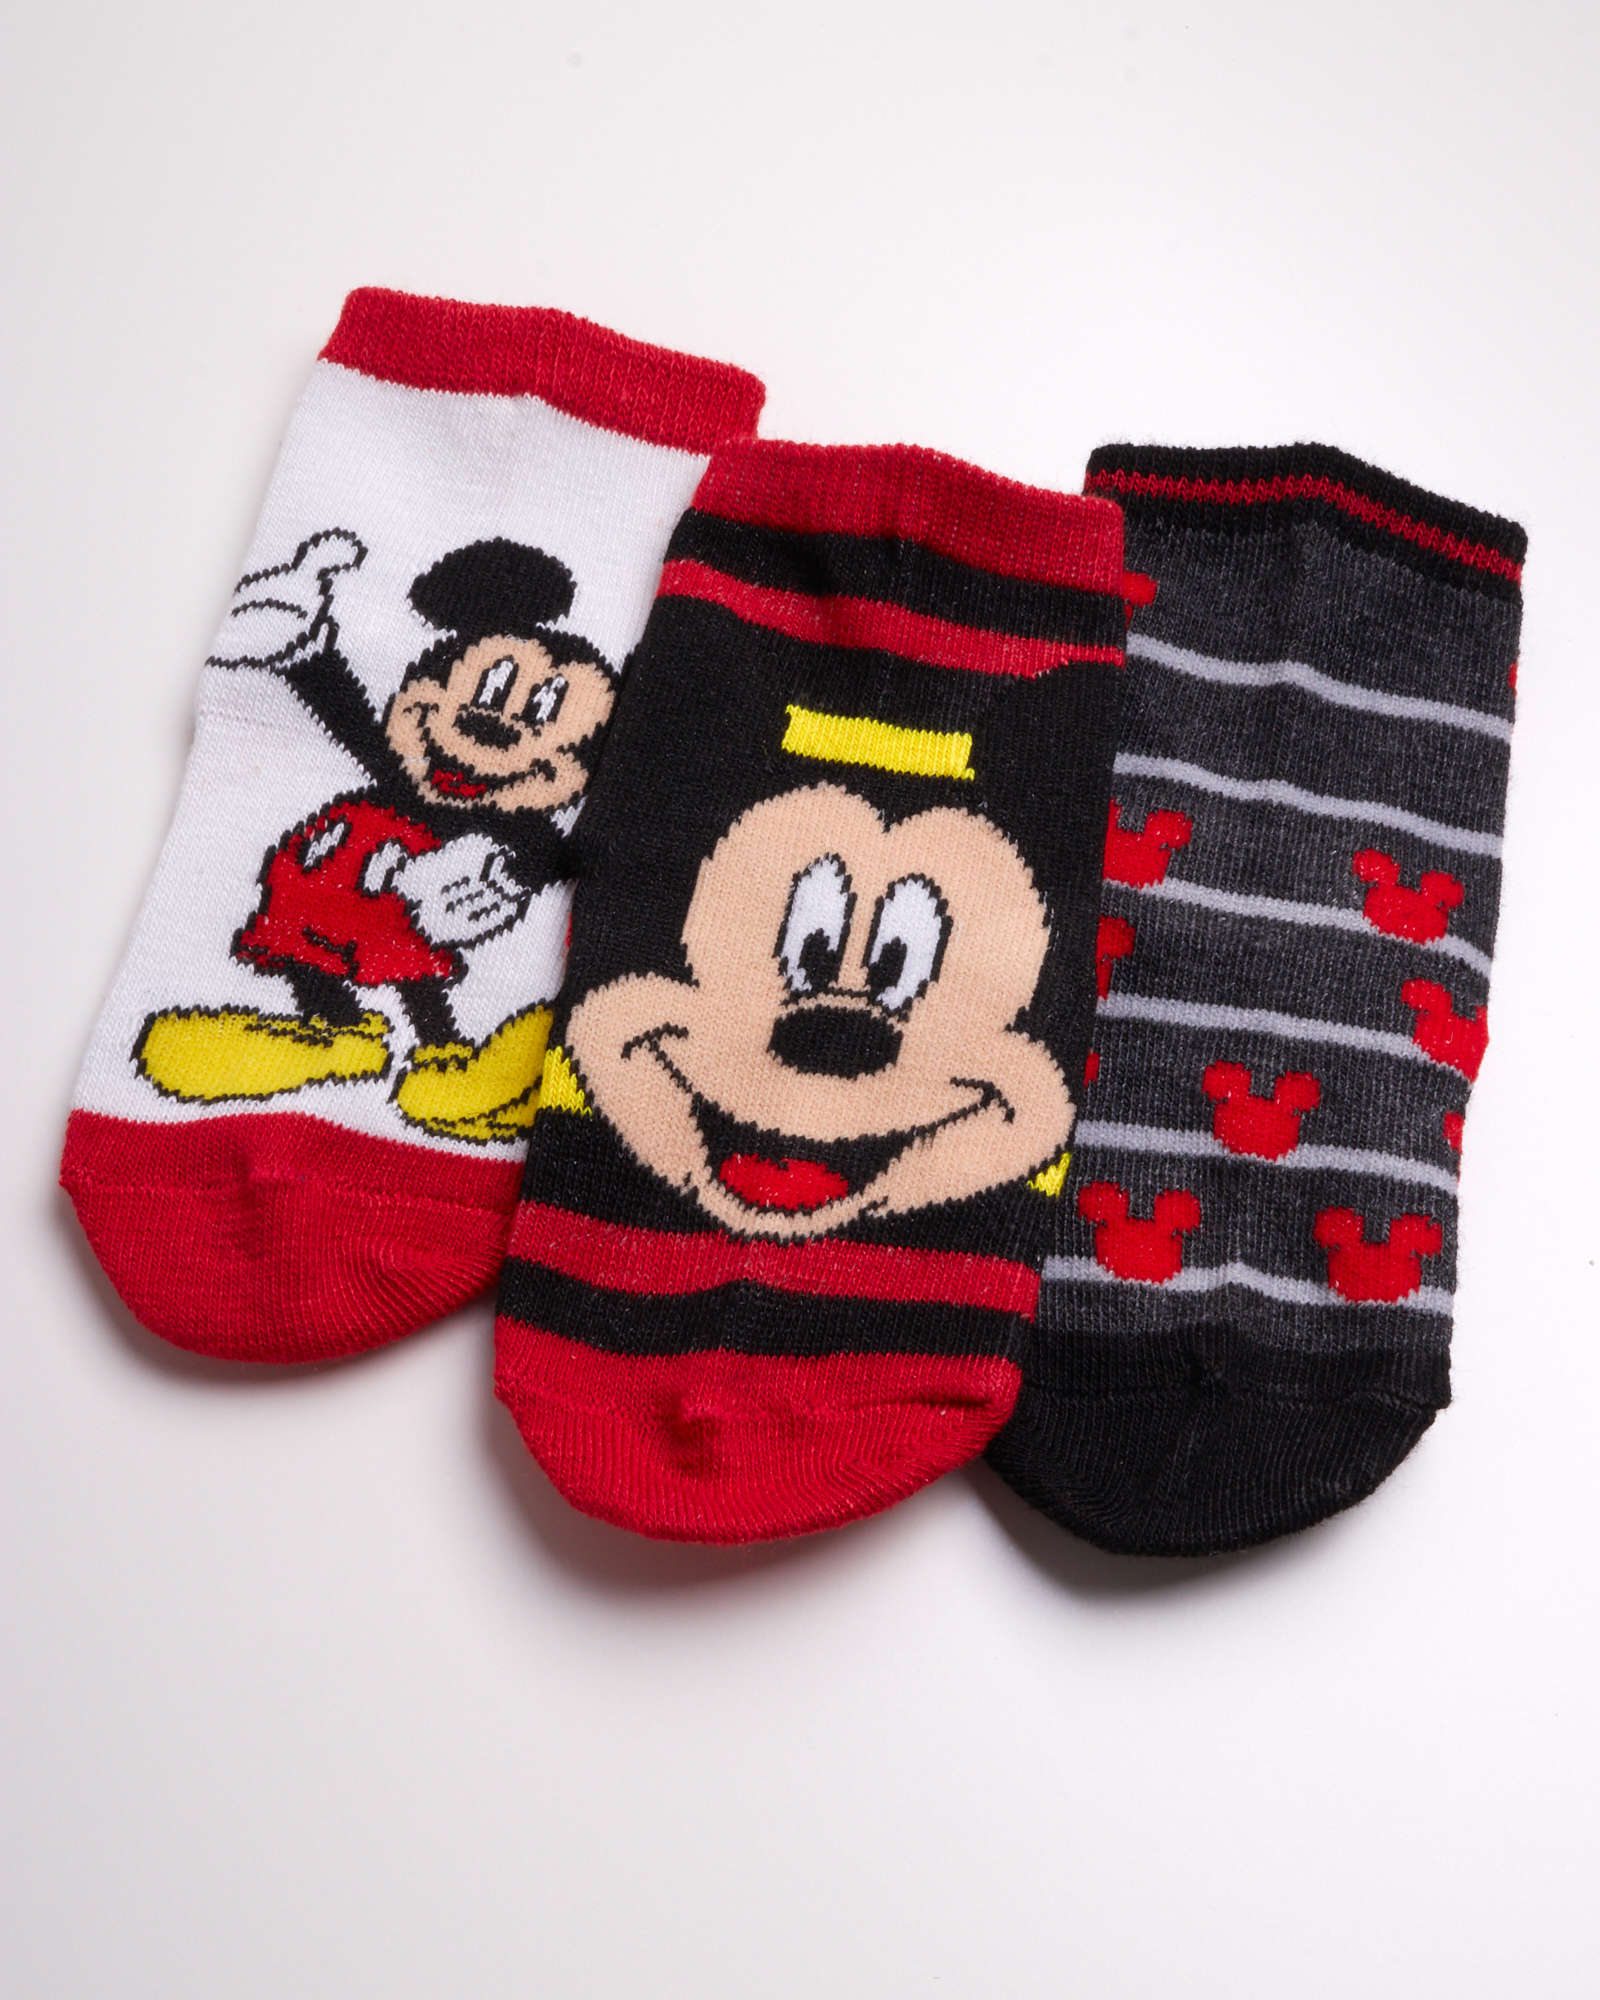 Disney Baby Boys Mickey Mouse Assorted Color Design 12 Pair Socks Set, Age 0-24 Months - image 4 of 5